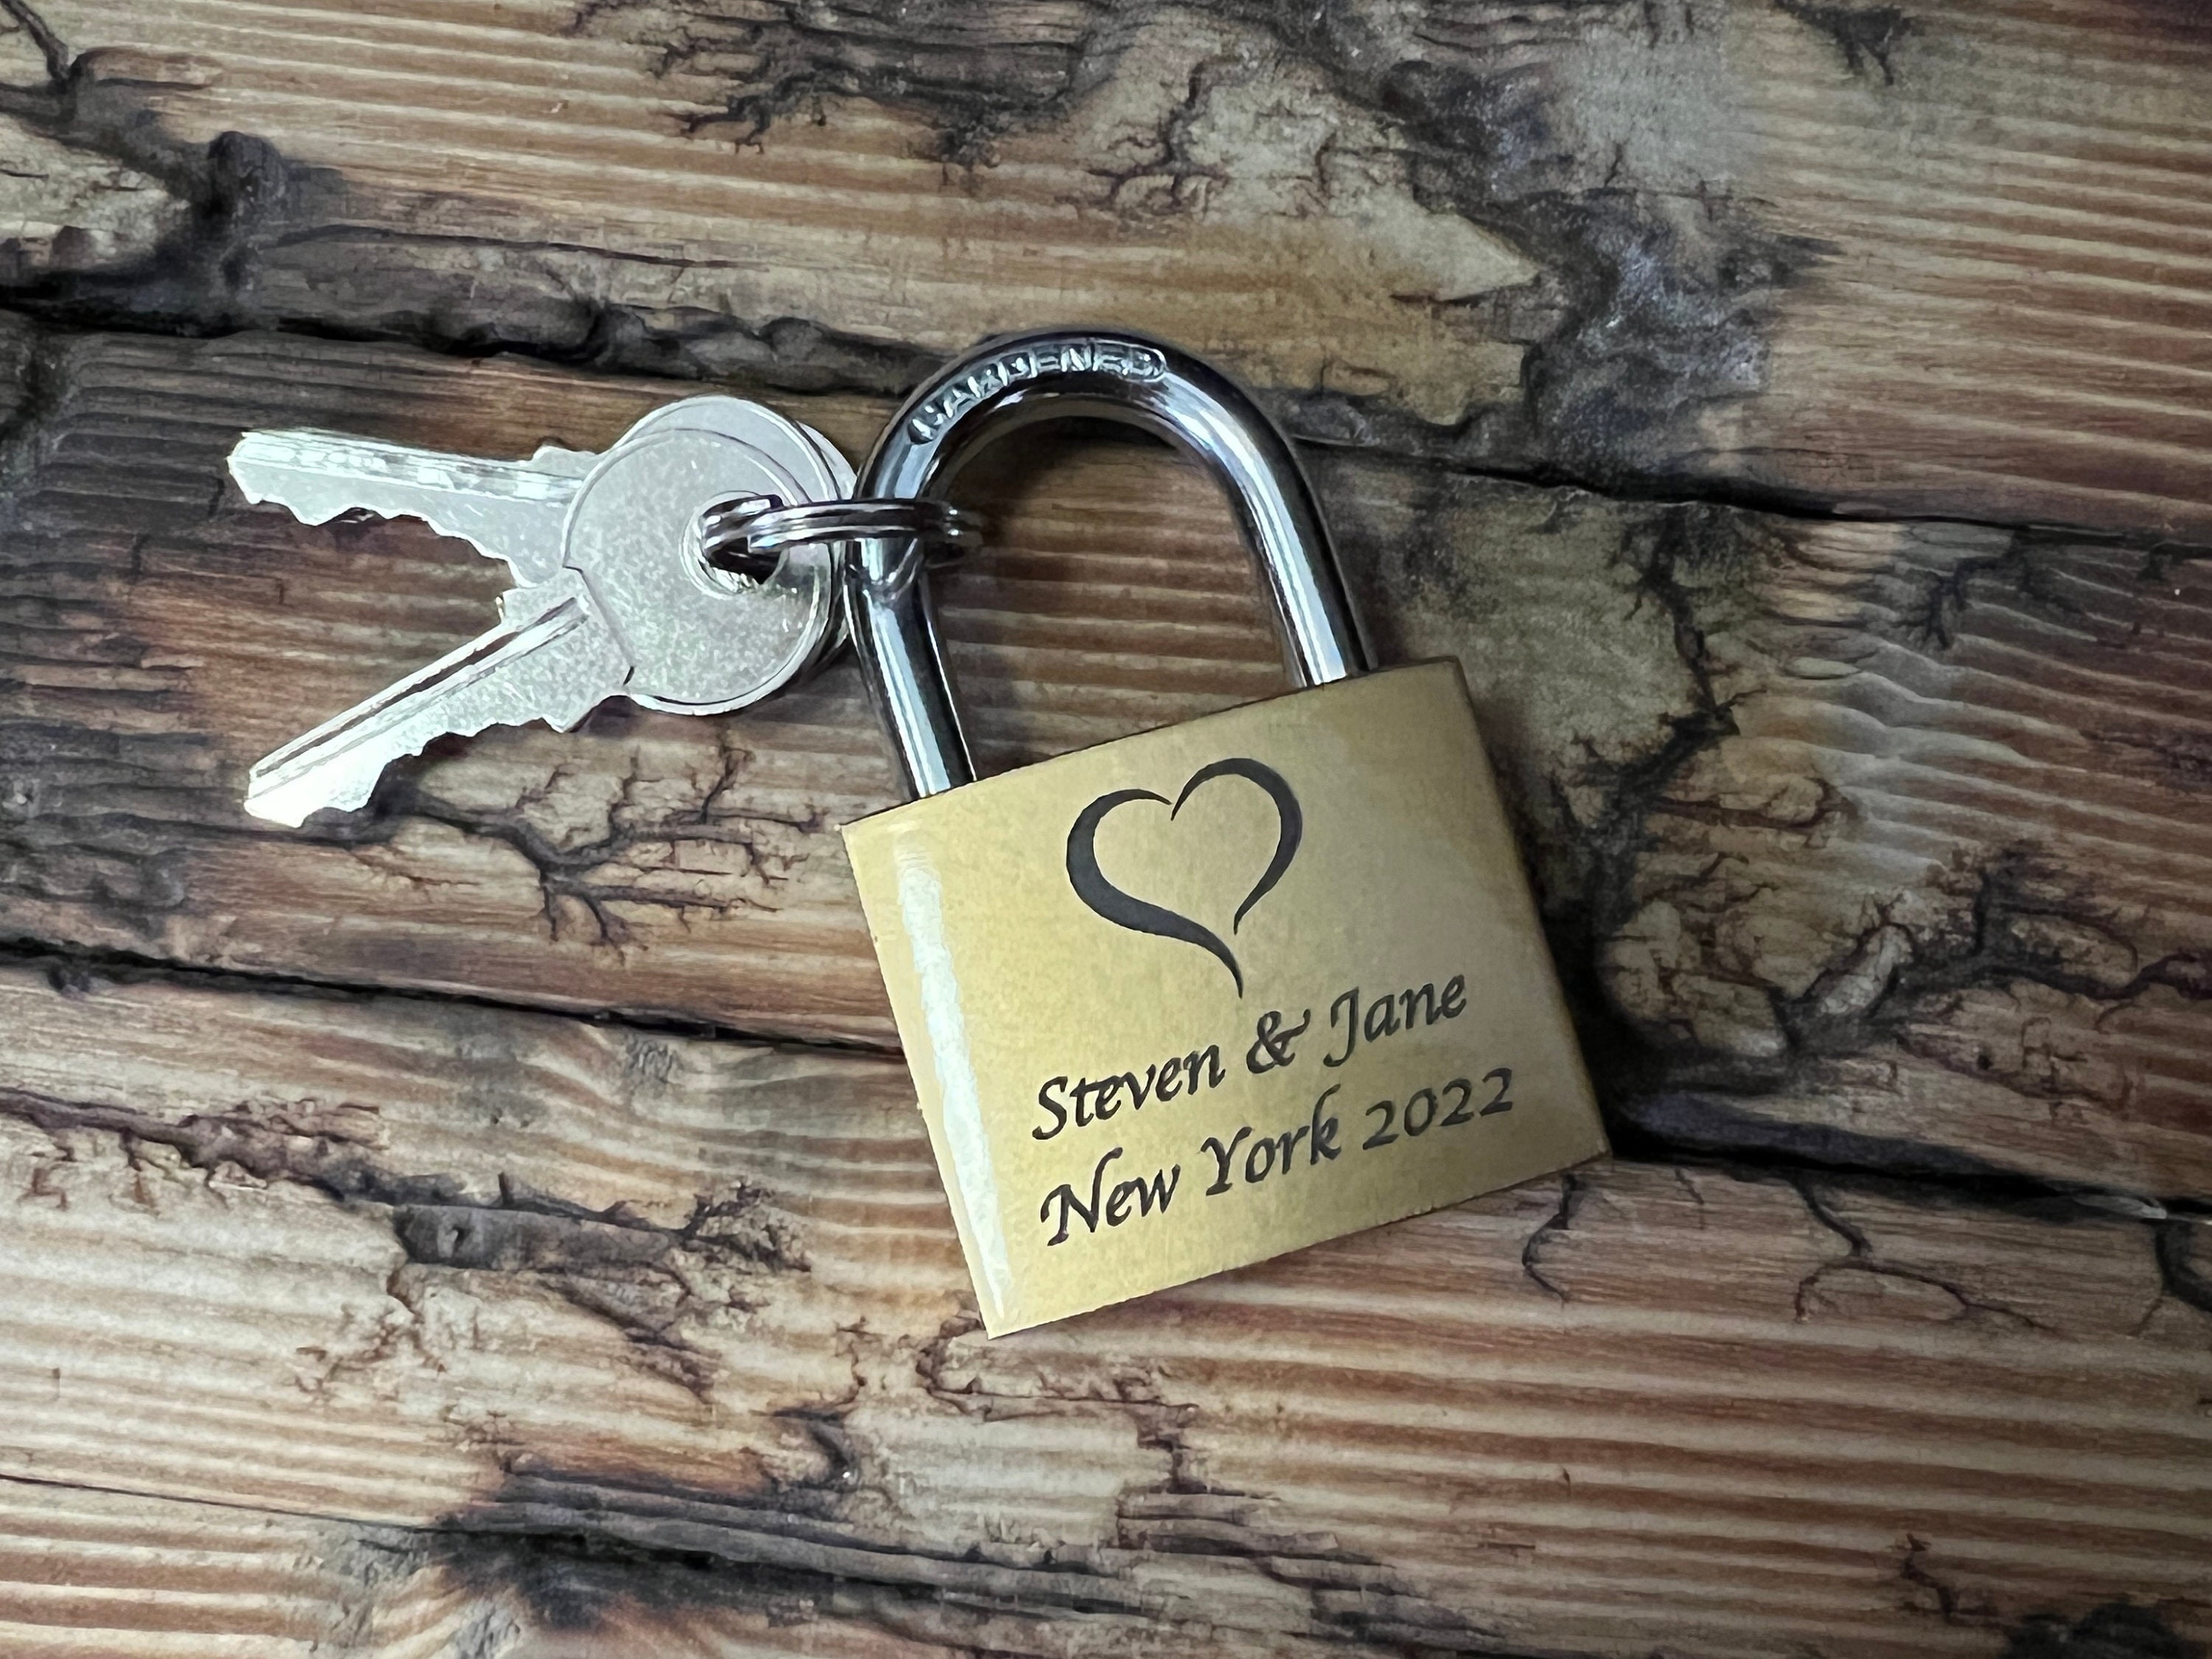 30mm Love Lock Personalised Engraved Padlock with Bride & Groom image,Bold Contrasting Text of your choice 